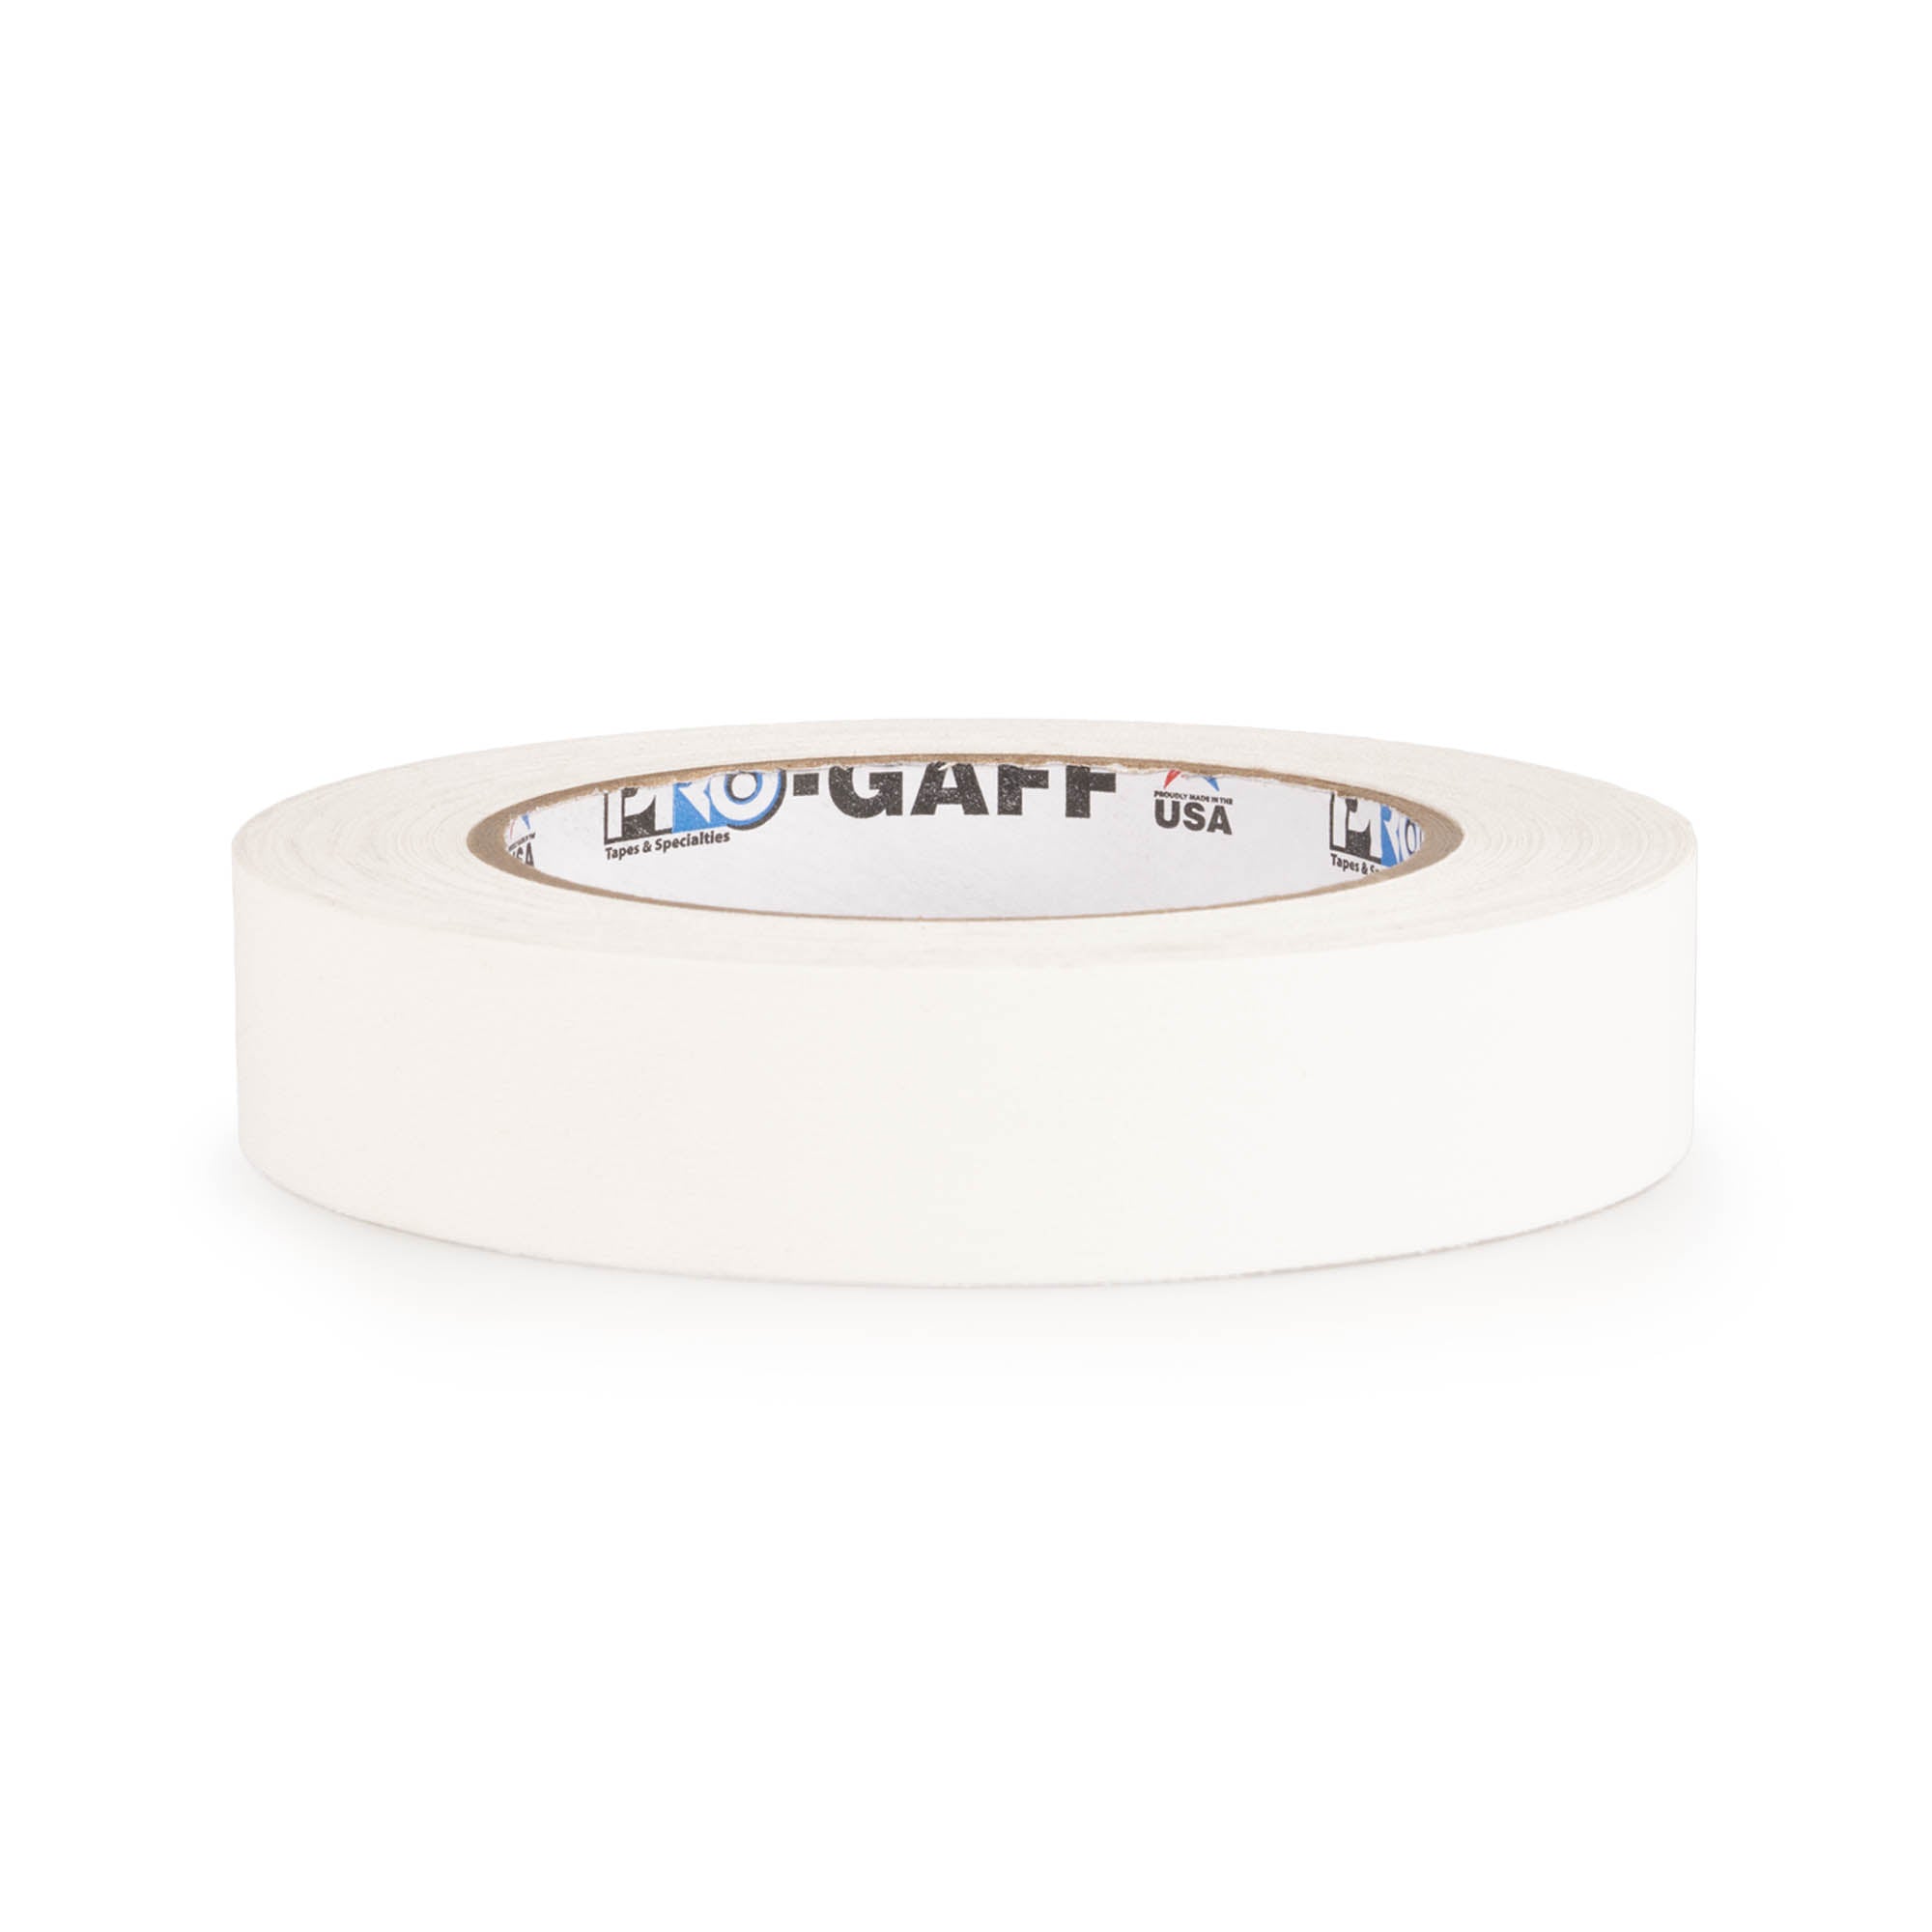 25m roll of pro gaff fabric adhesive tape in white laying in a white background